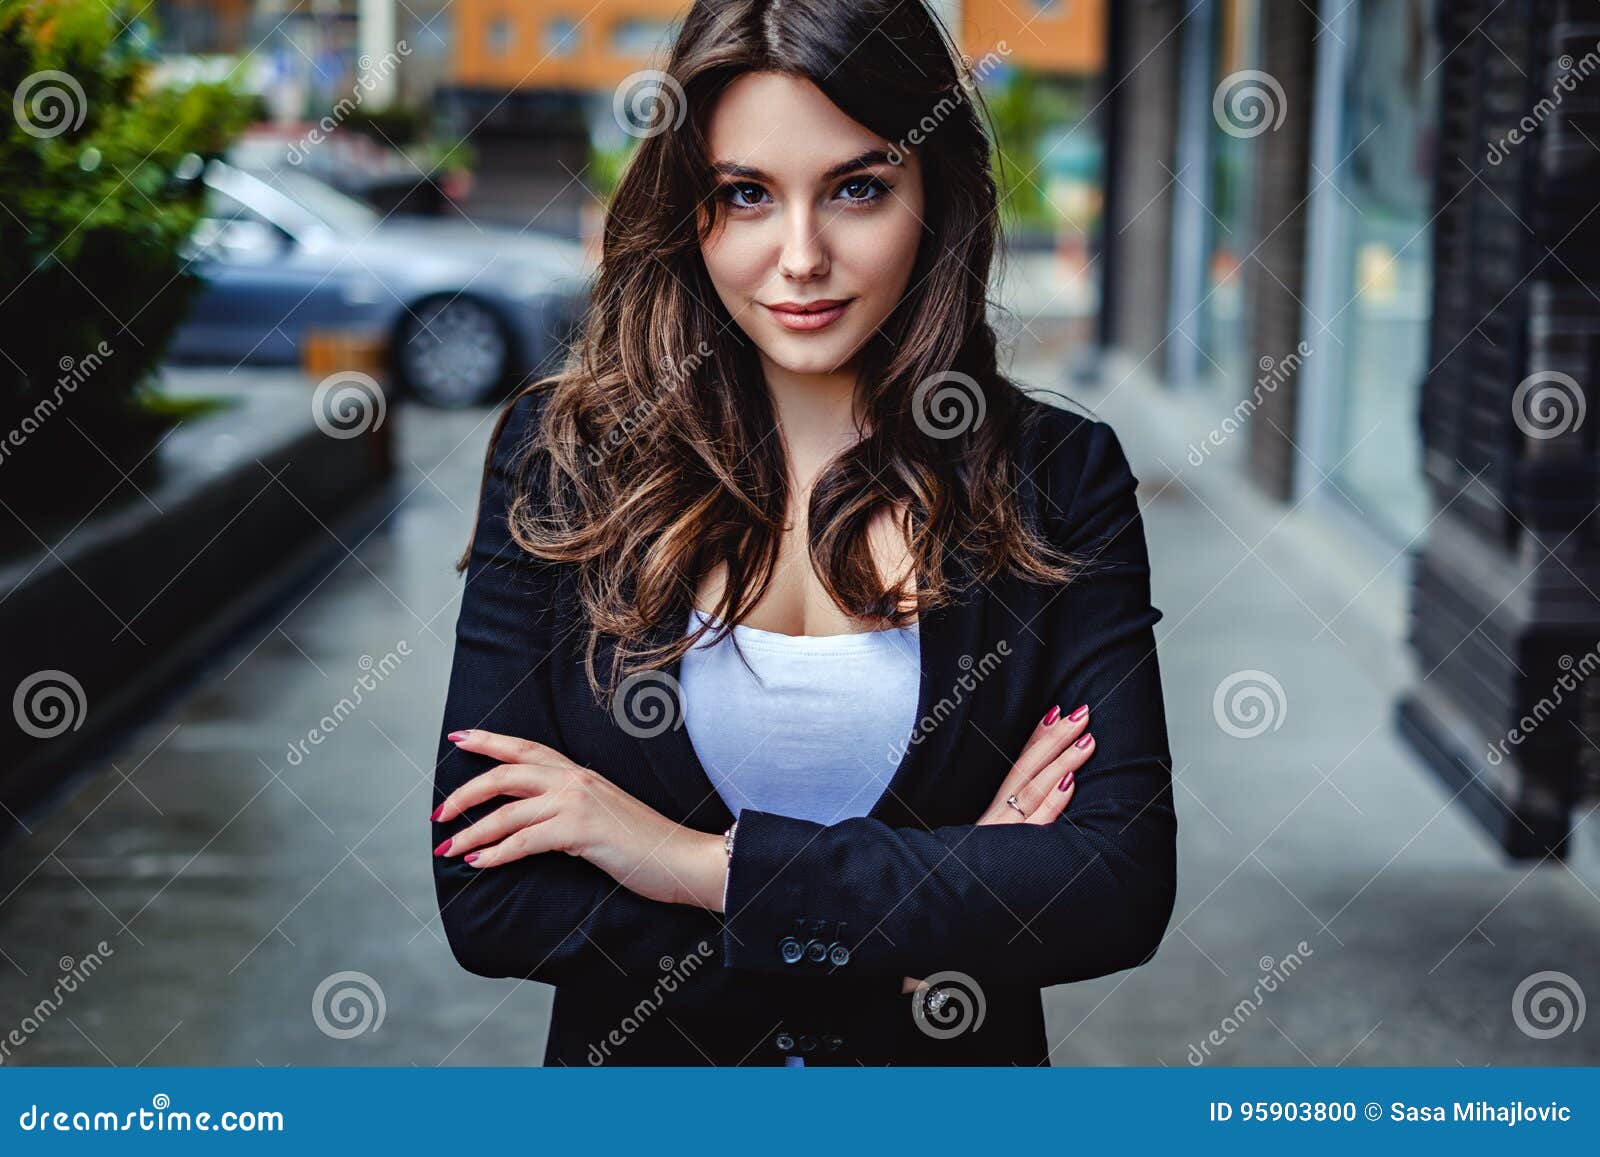 confident business woman looking at the camera